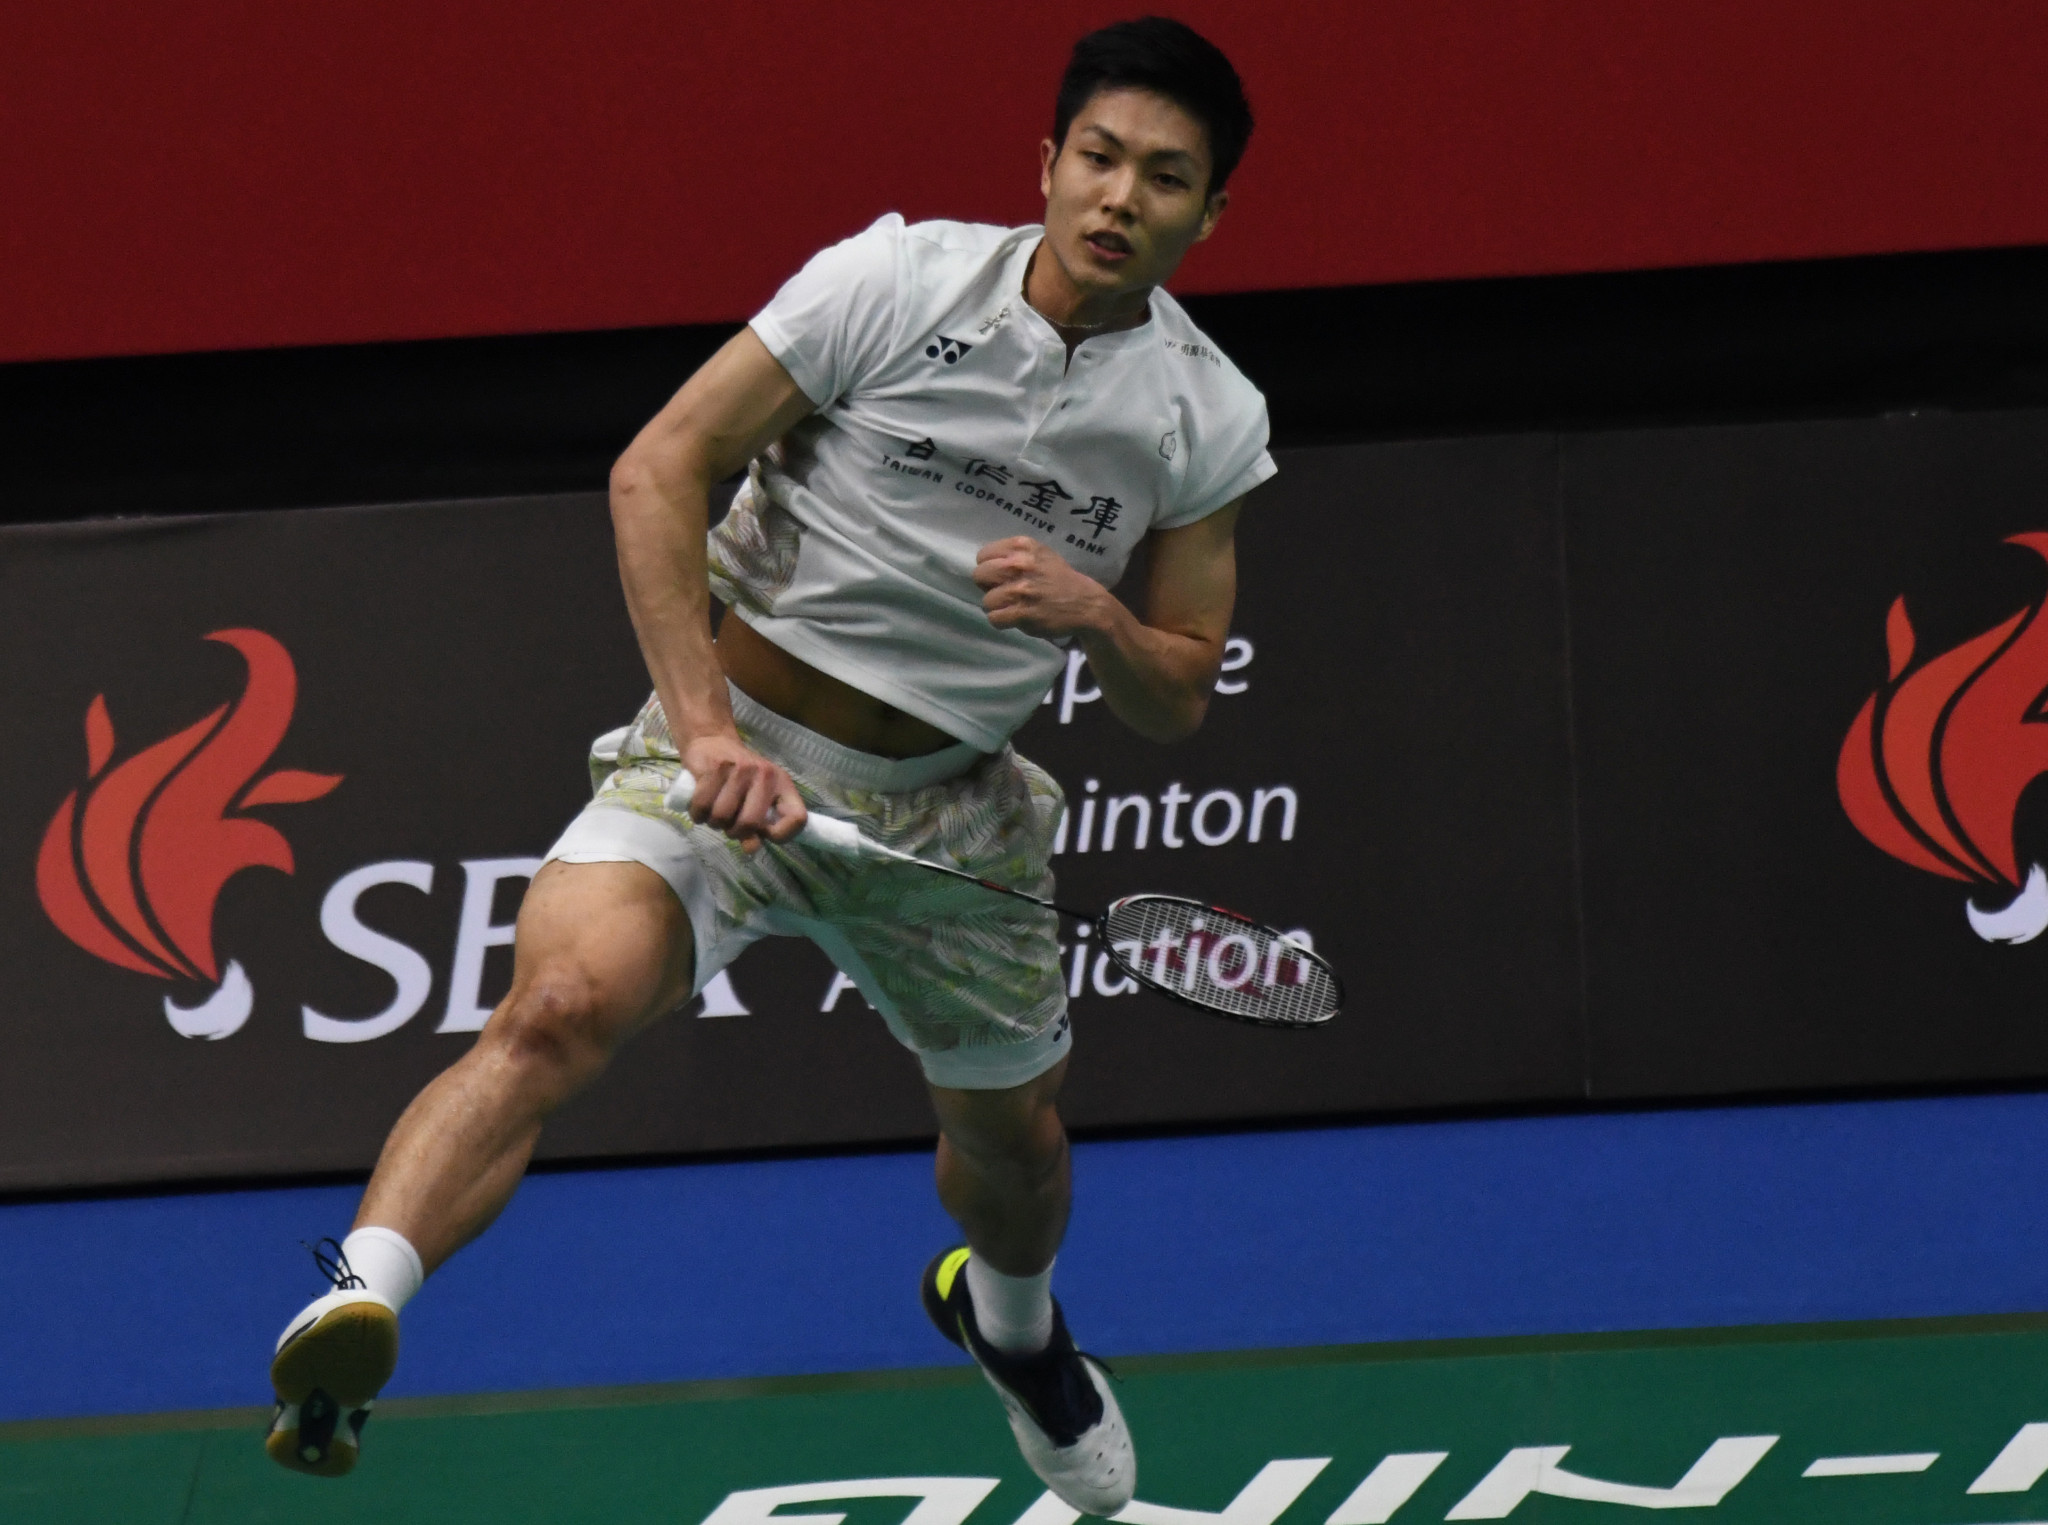 Men's singles top seed Chou Tien Chen of Chinese Taipei survived a tough opening game to beat South Korea's Lee Hyun-il ©Getty Images